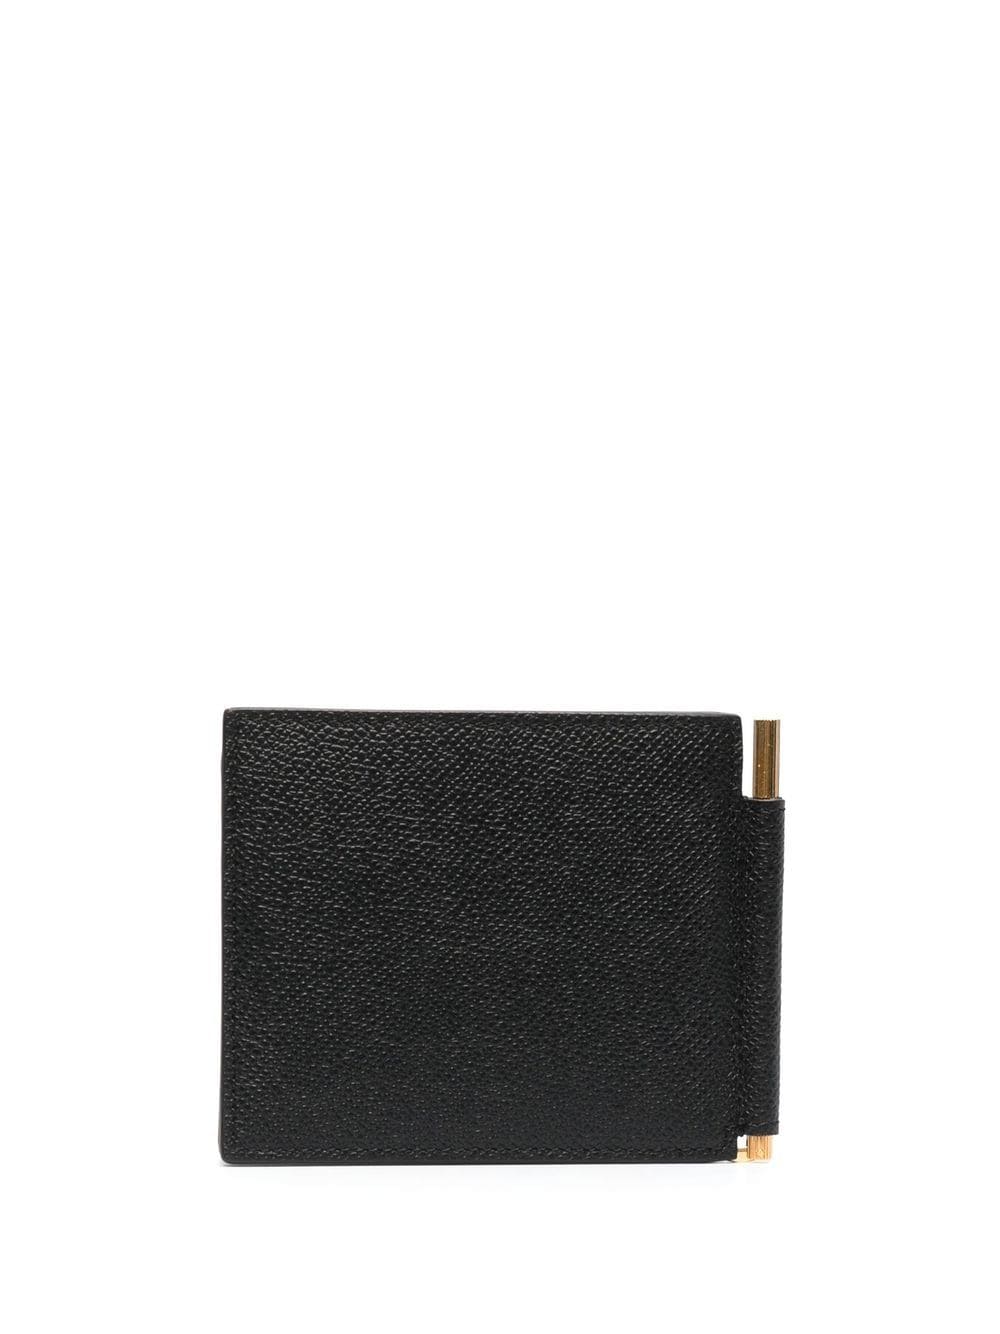 Image 2 of TOM FORD hinged leather bifold wallet